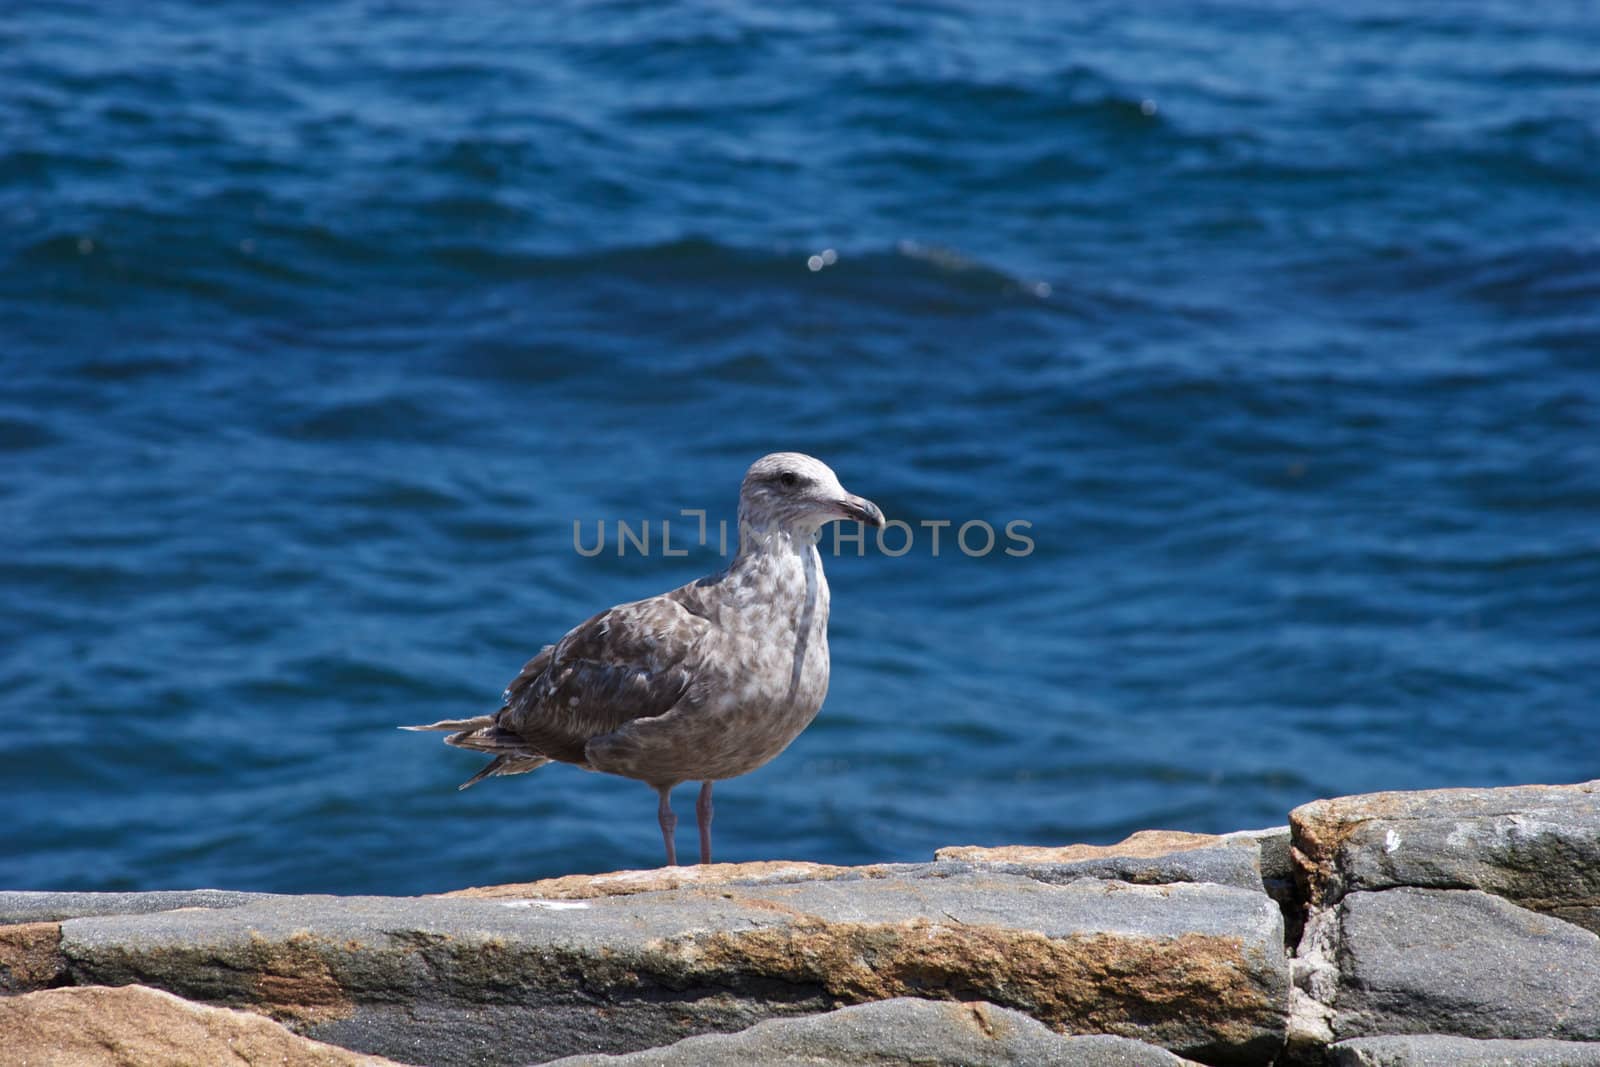 A close-up of a sea gull sitting on rocks with the ocean in the background.